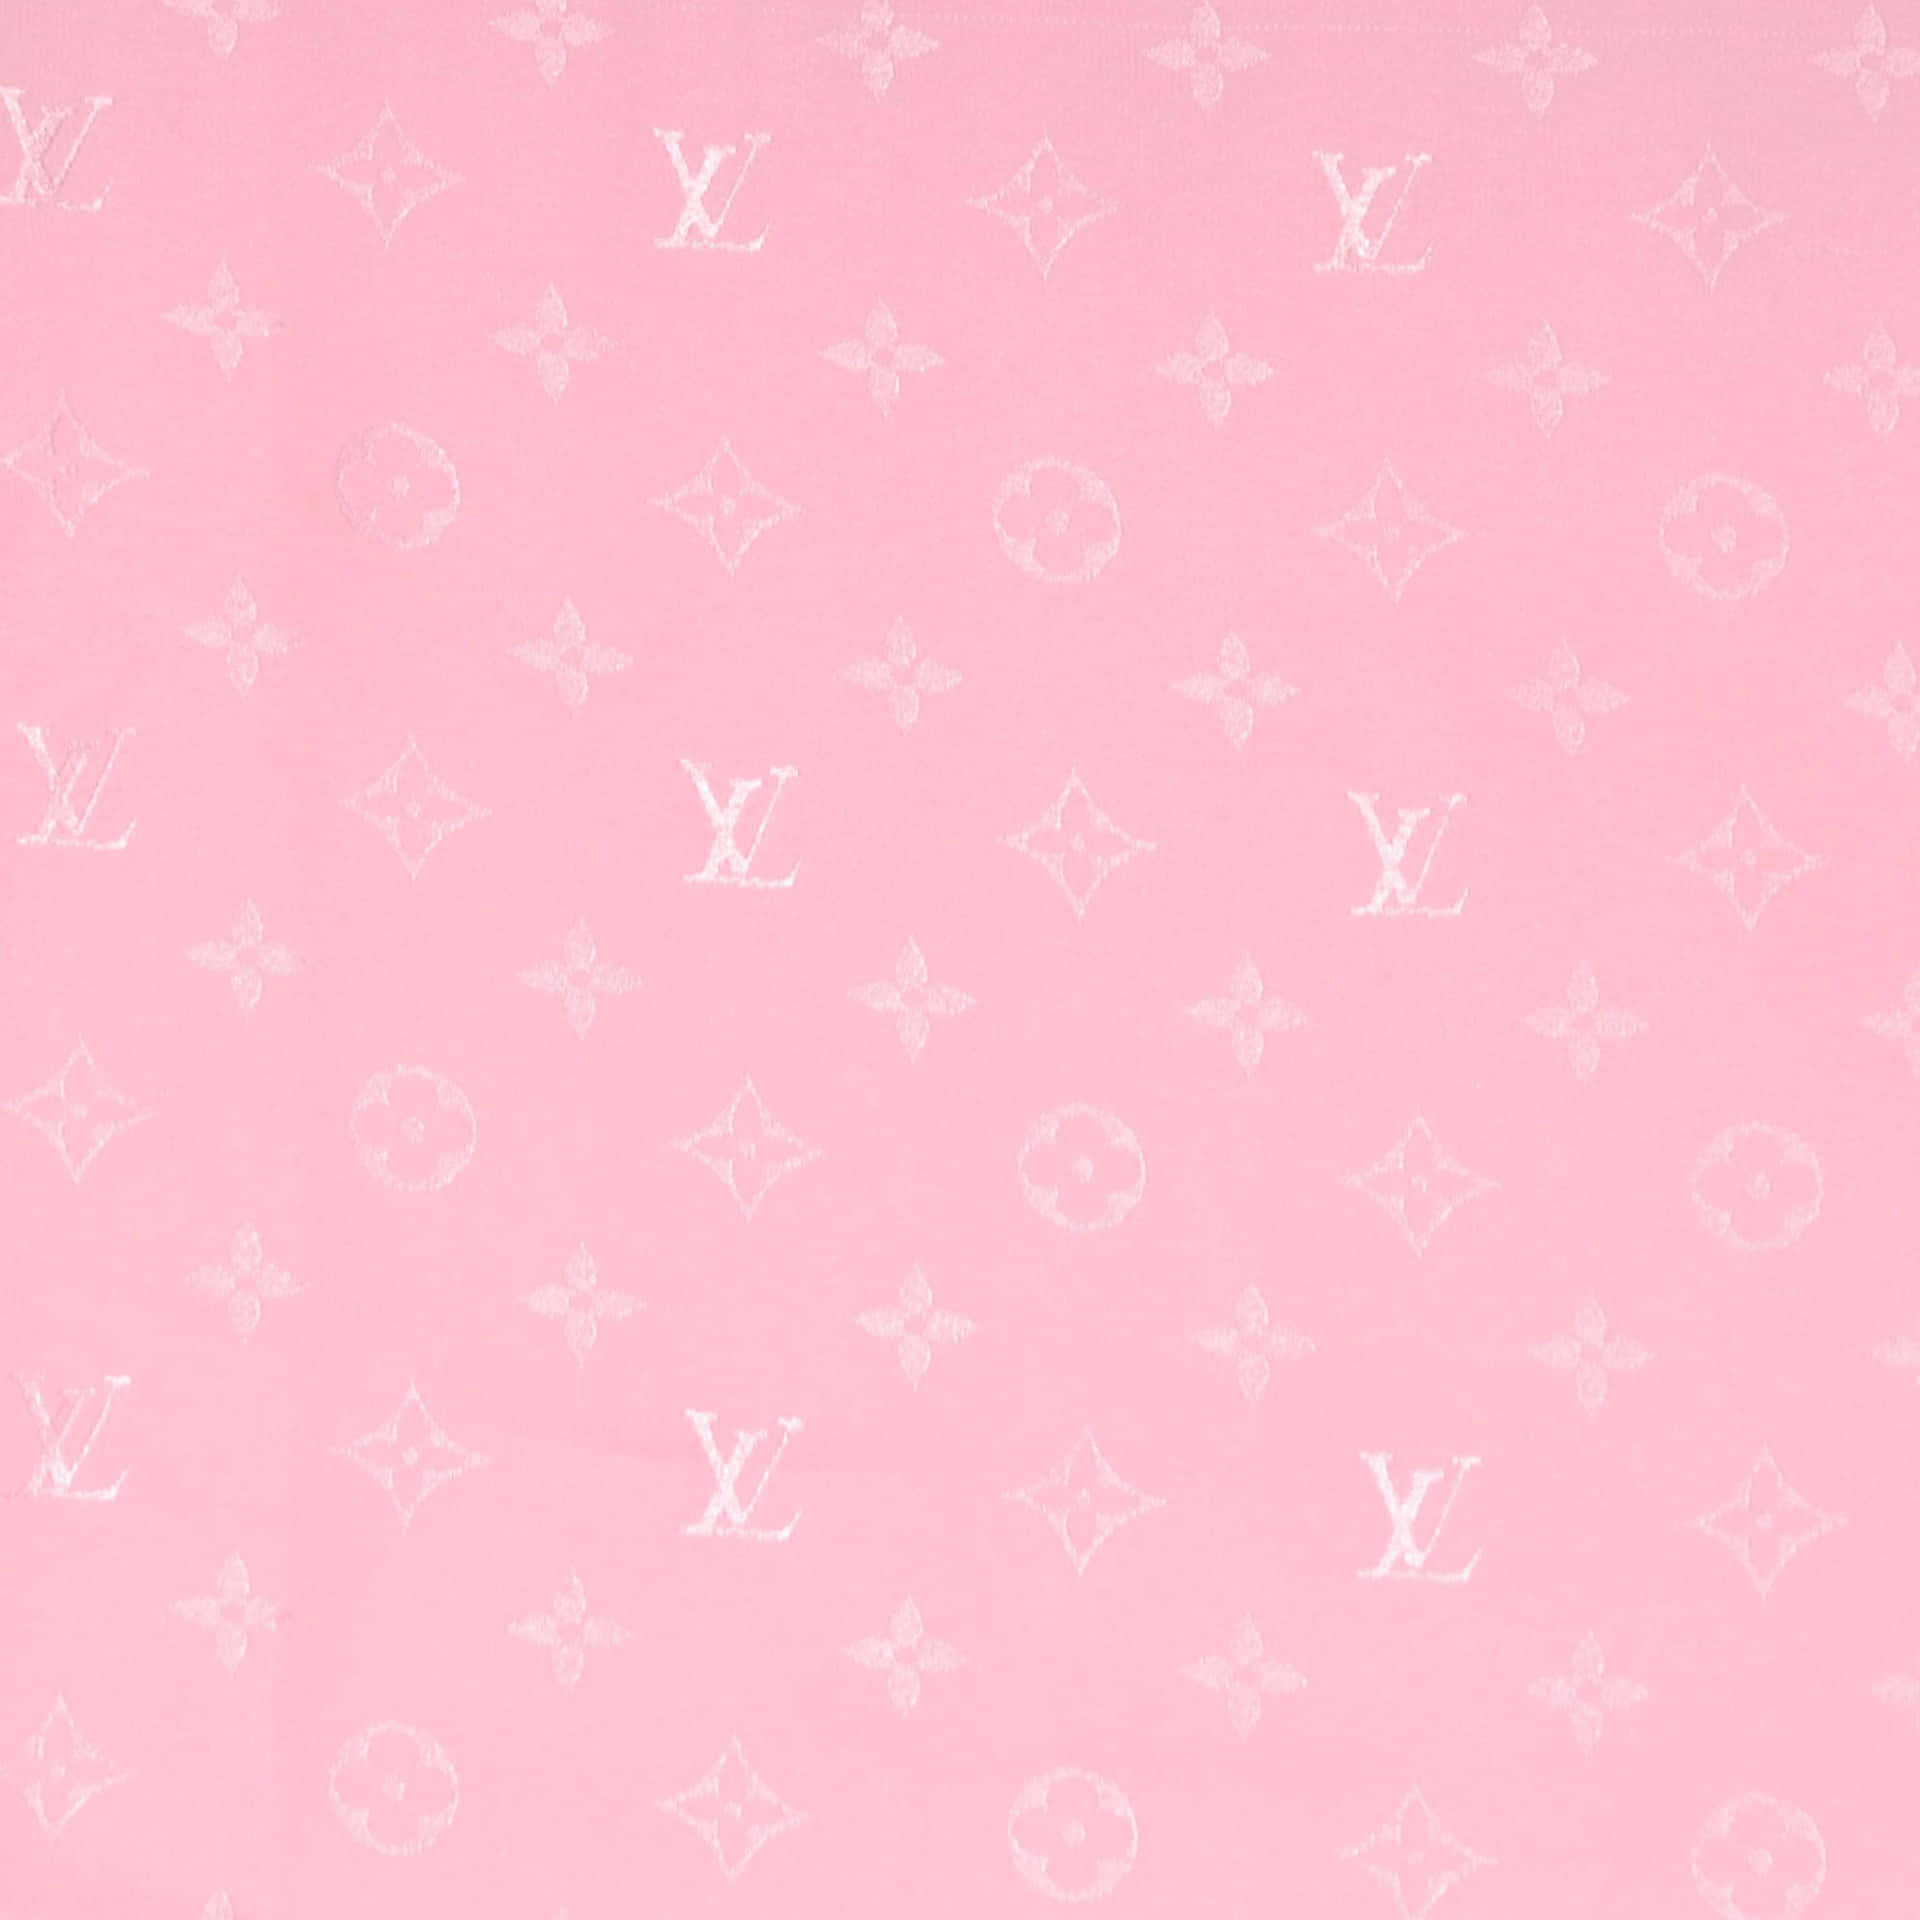 Download A Chic Look - A Shimmering Louis Vuitton Pink Wallpaper